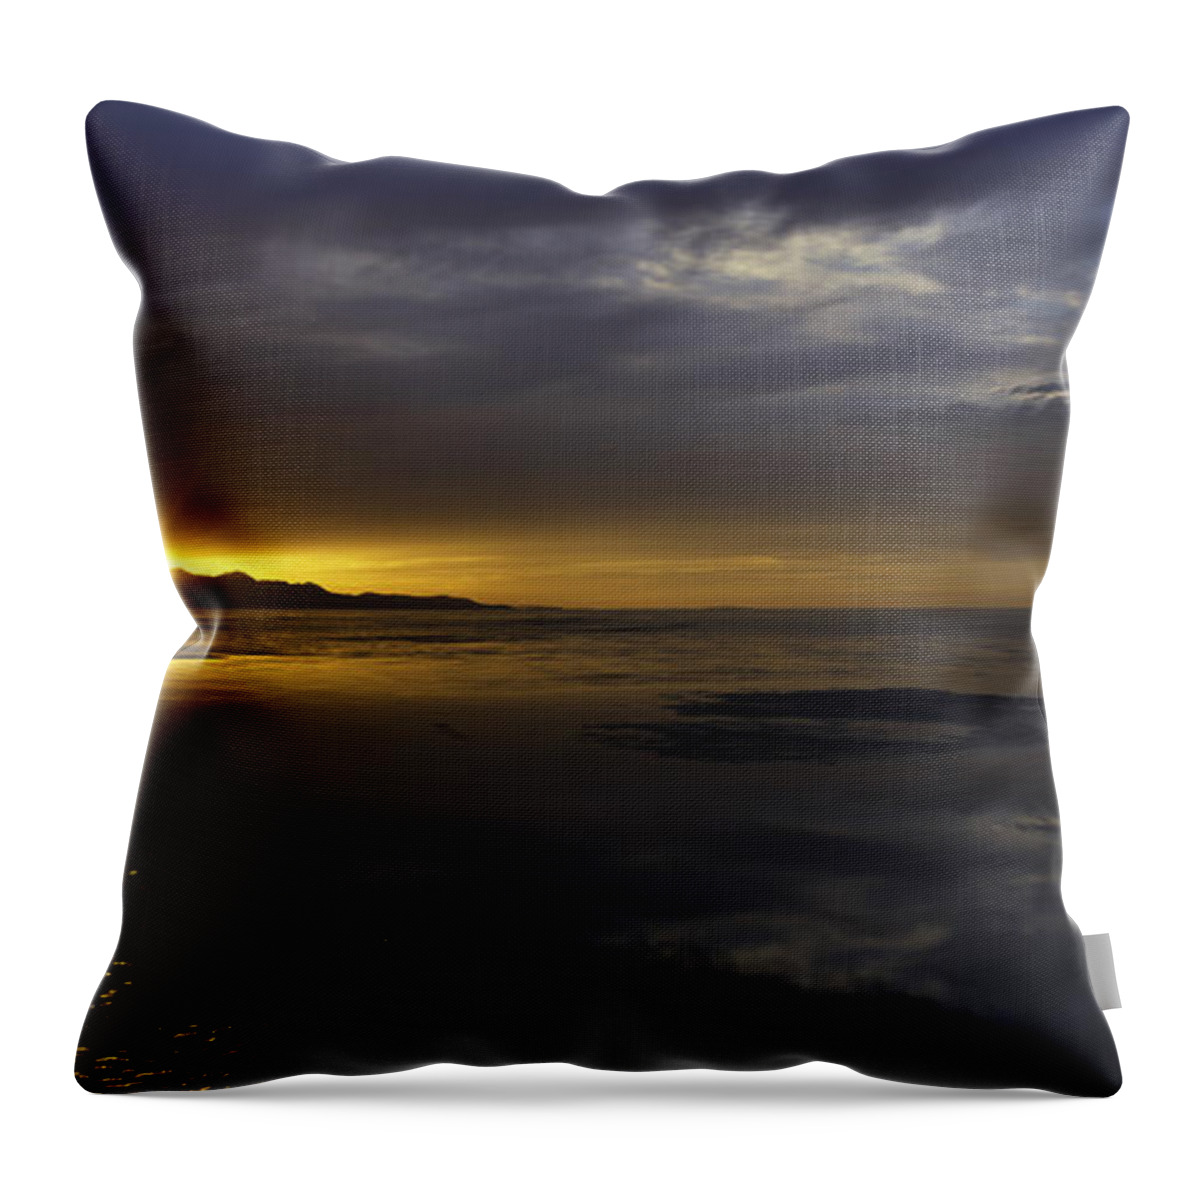 Sudden Glow Throw Pillow featuring the photograph Sudden Glow by Chad Dutson